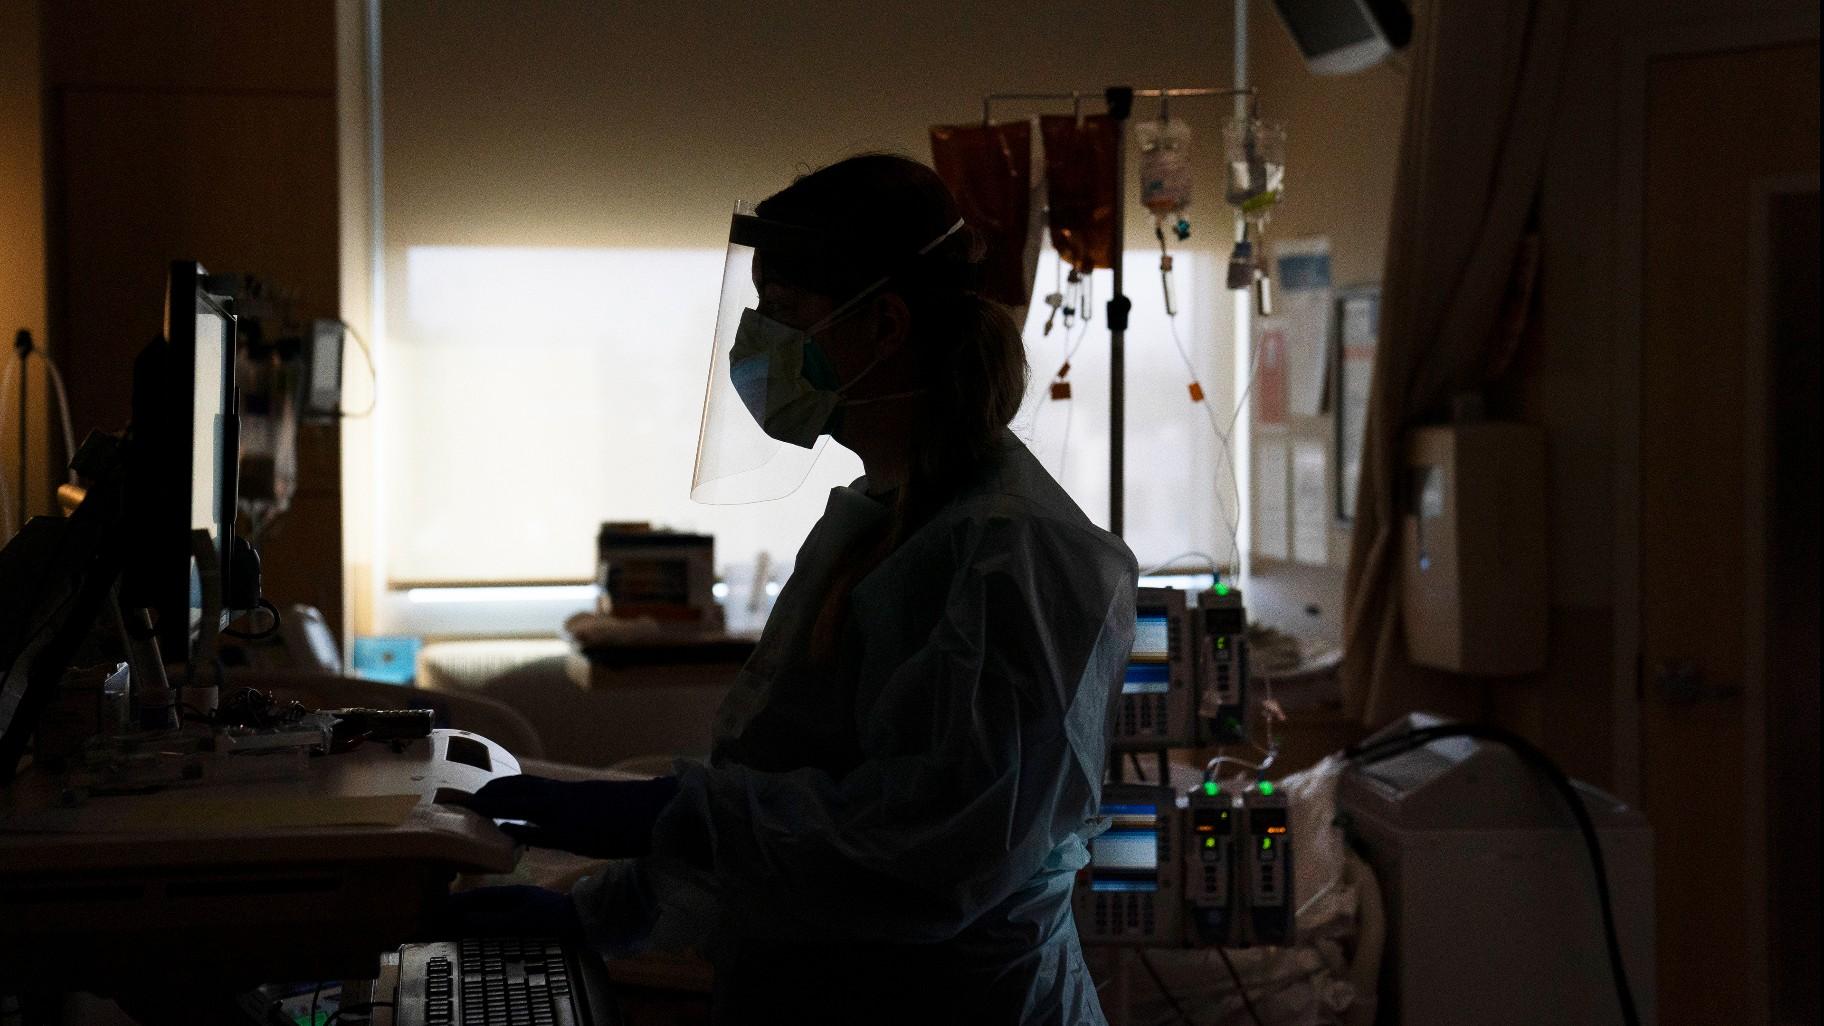  A registered nurse works on a computer while assisting a COVID-19 patient in Los Angeles. (AP Photo / Jae C. Hong, File)